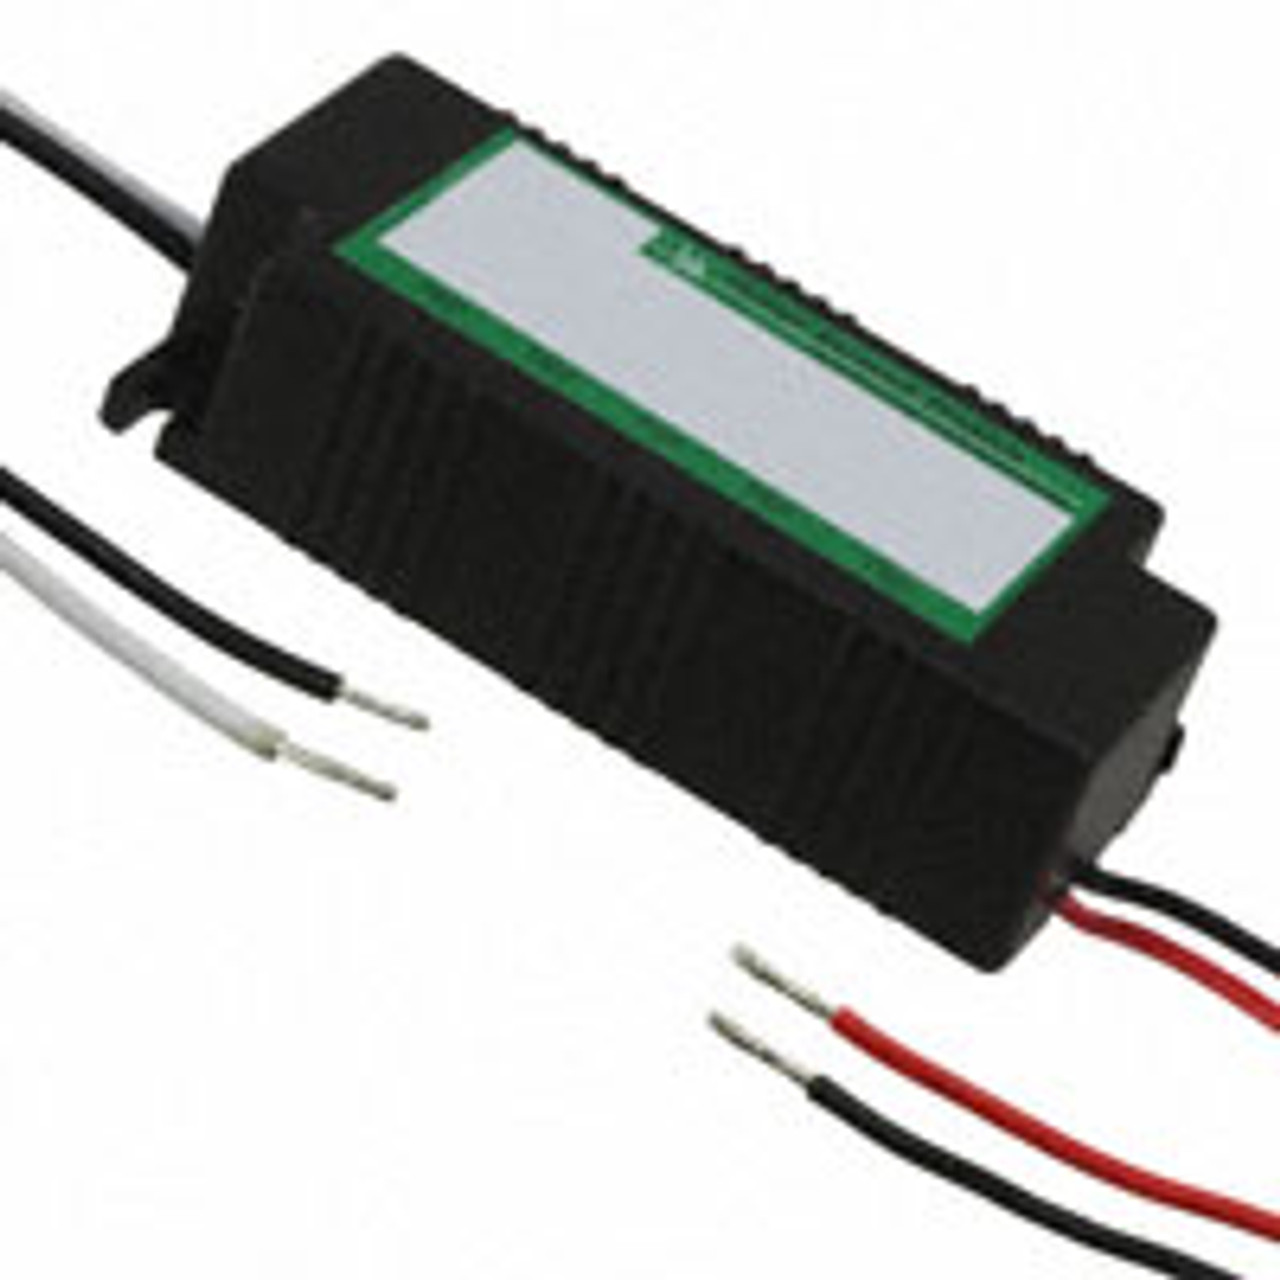 LED20W-40-C0350-LE Thomas Research Constant Current LED Driver